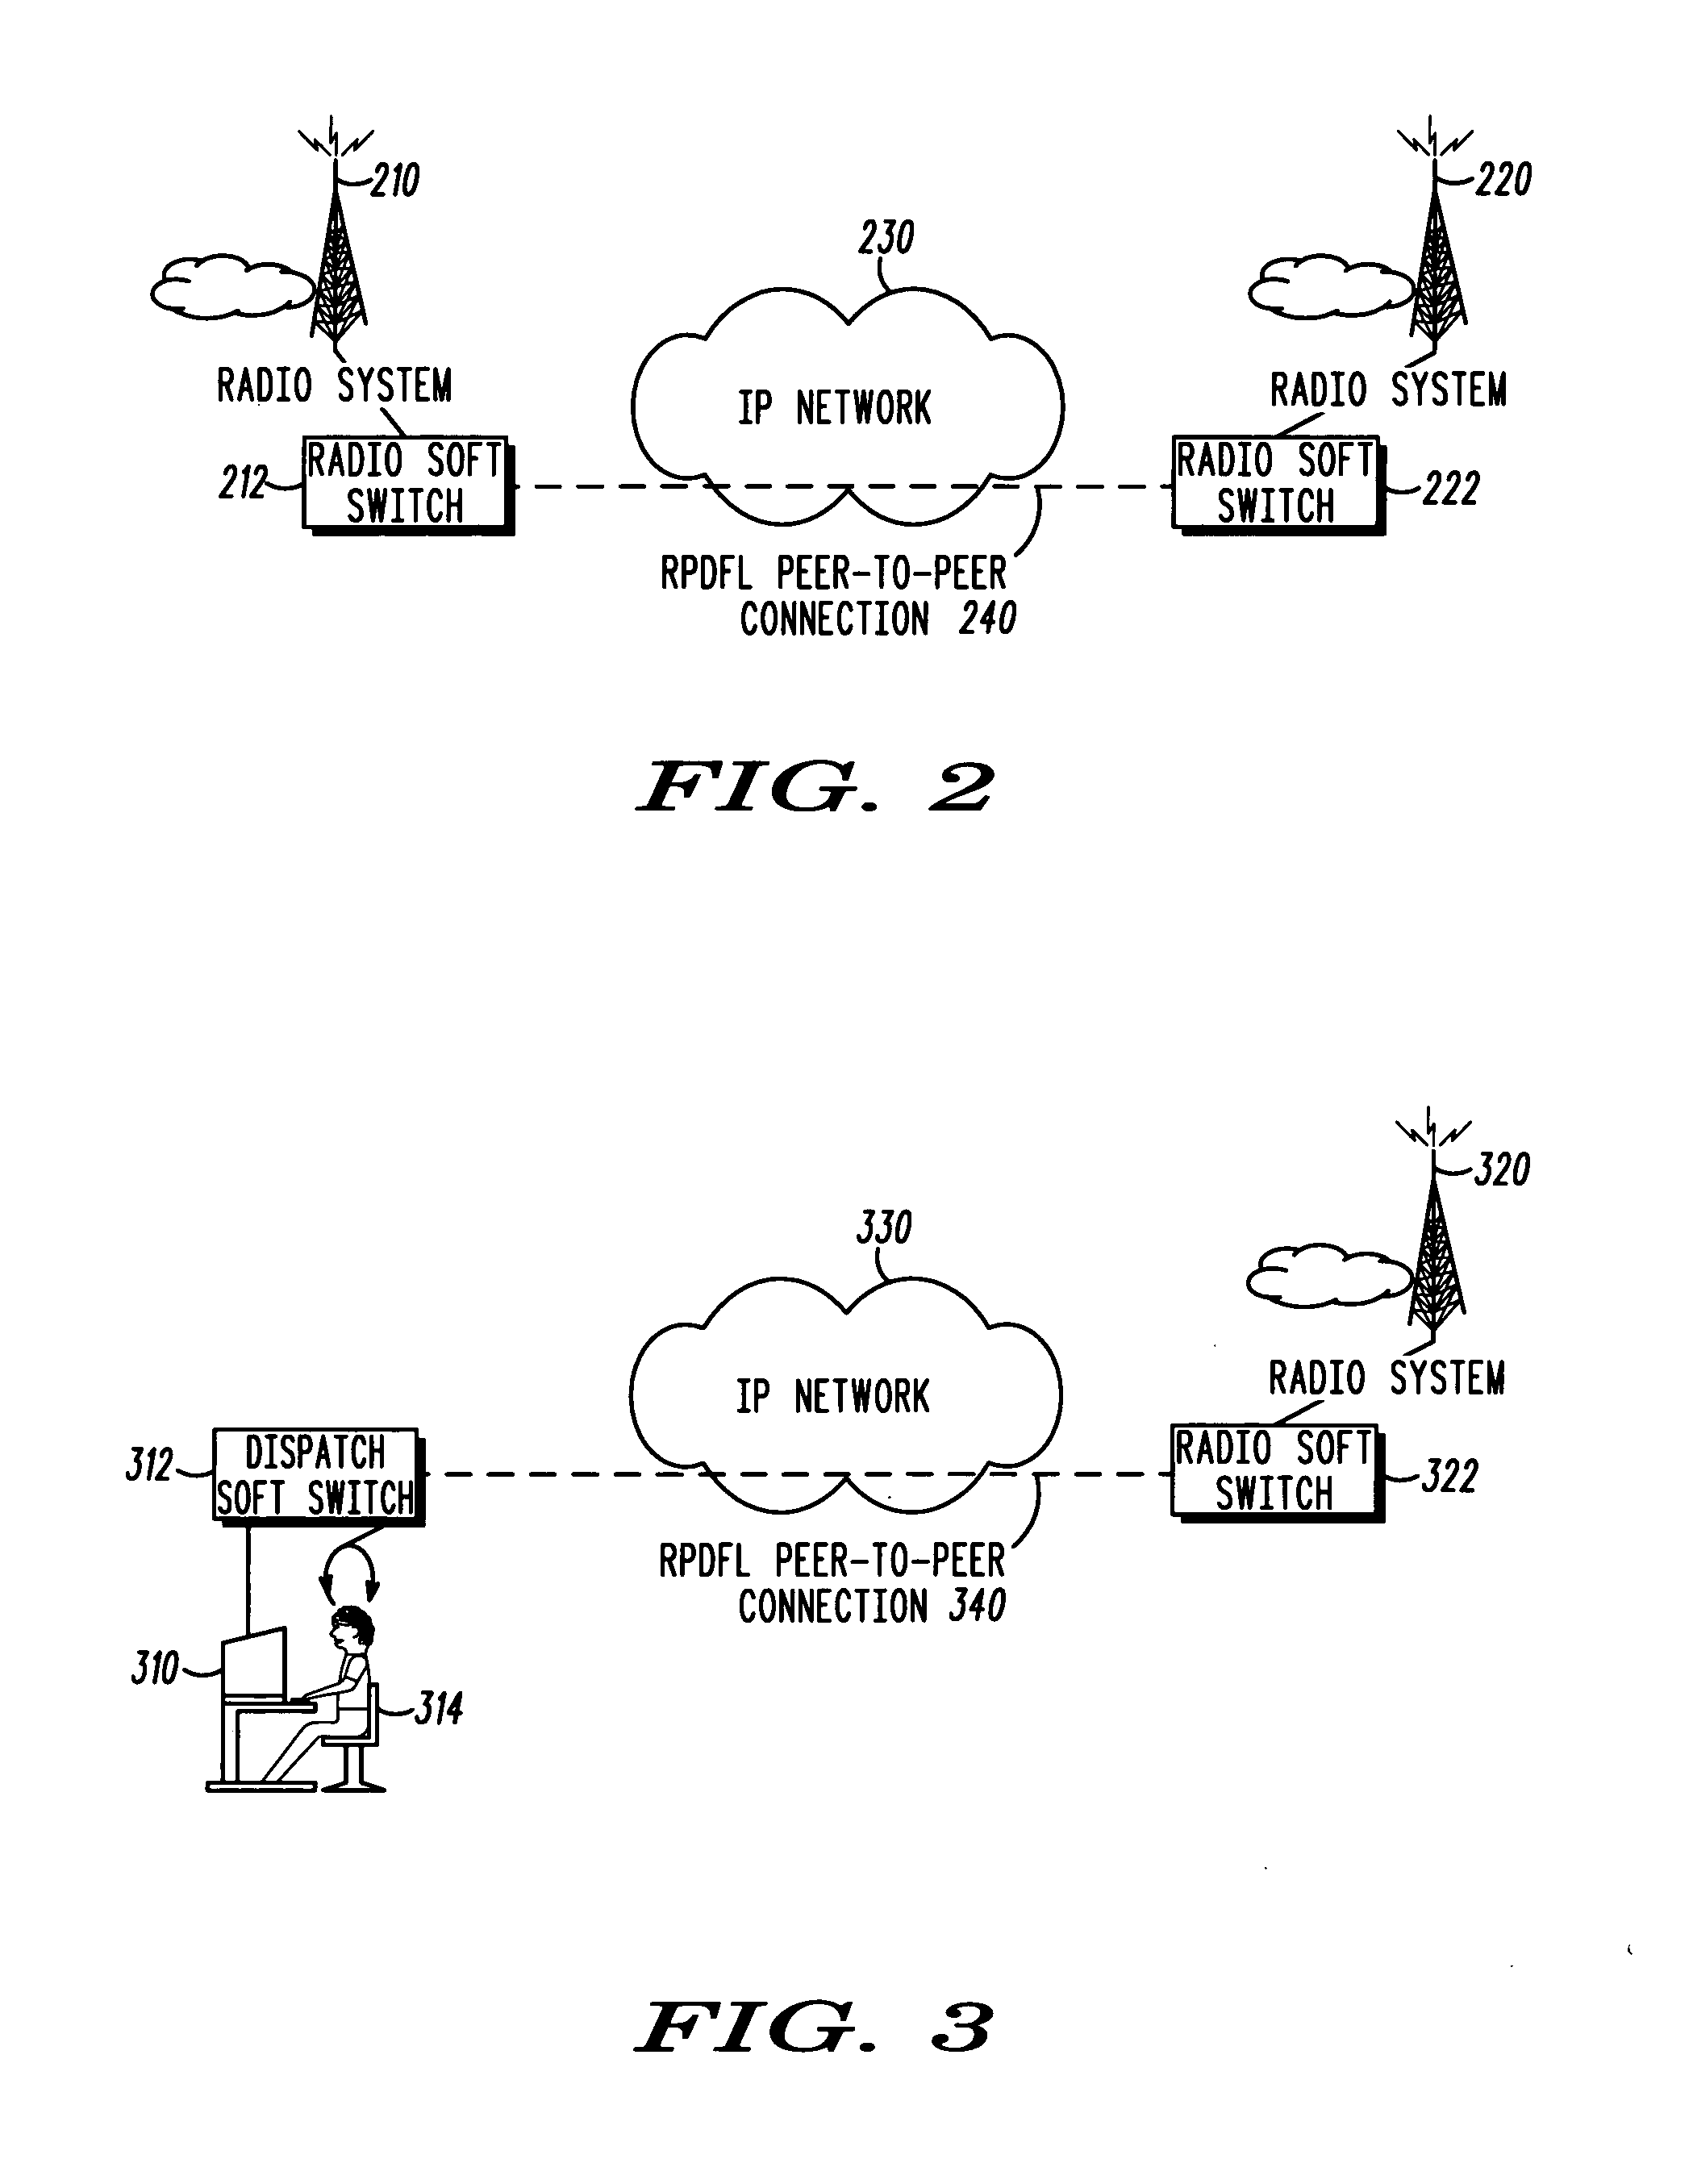 Method and apparatus for session layer framing to enable interoperability between packet-switched systems